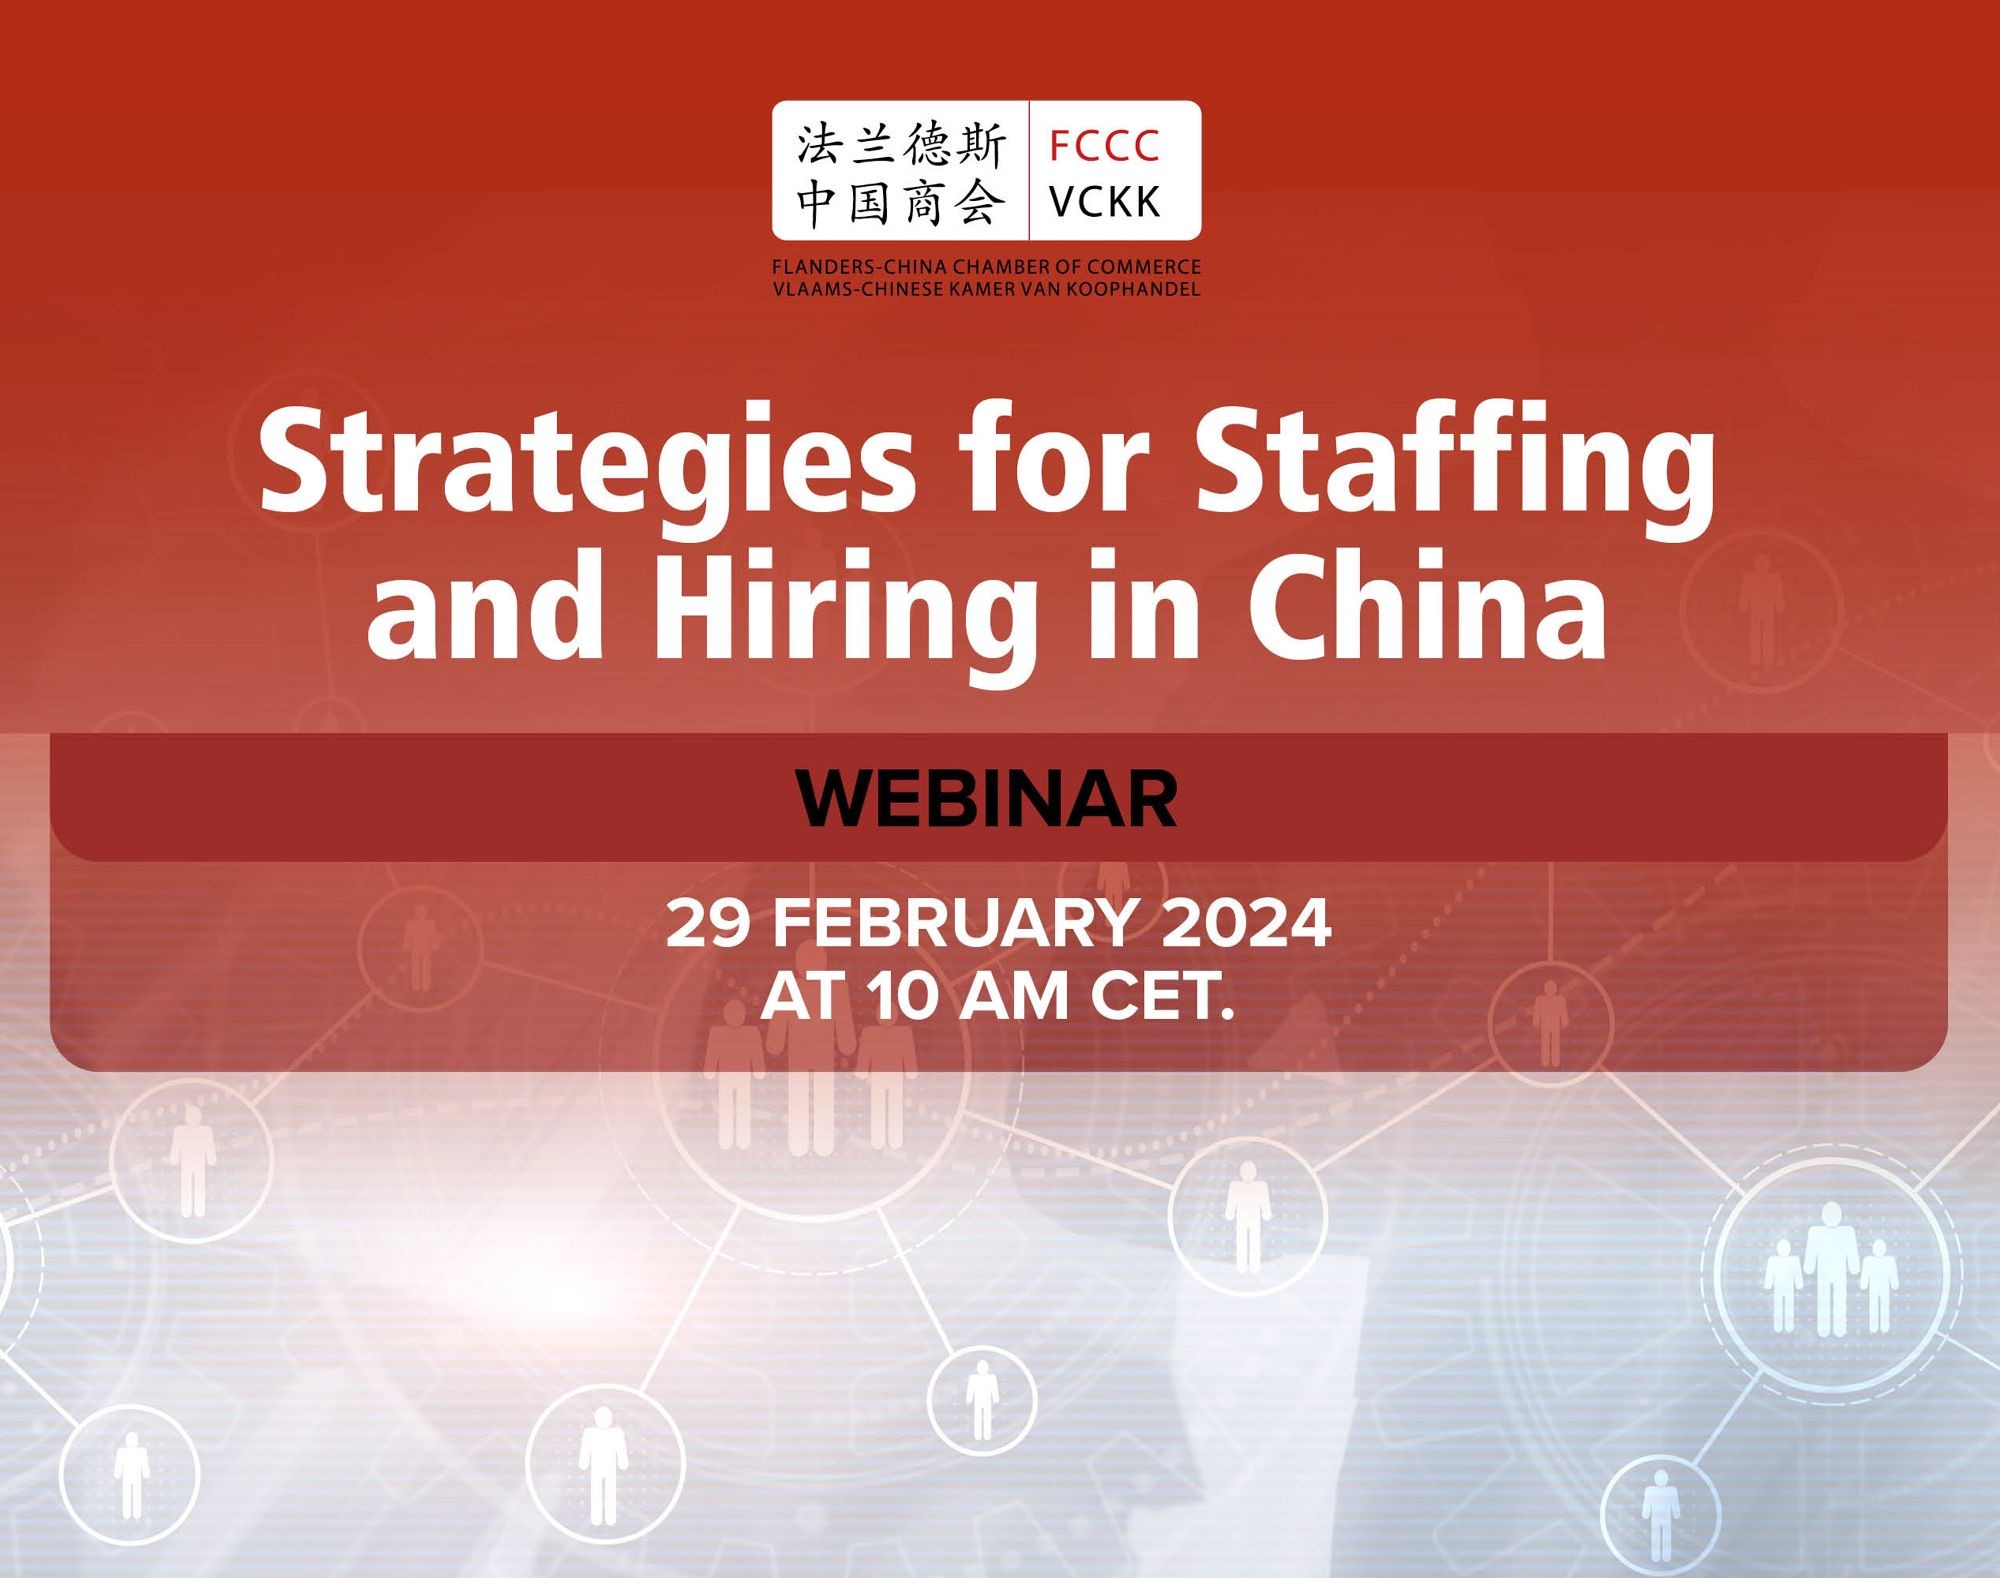 Webinar: Strategies for Staffing and Hiring in China